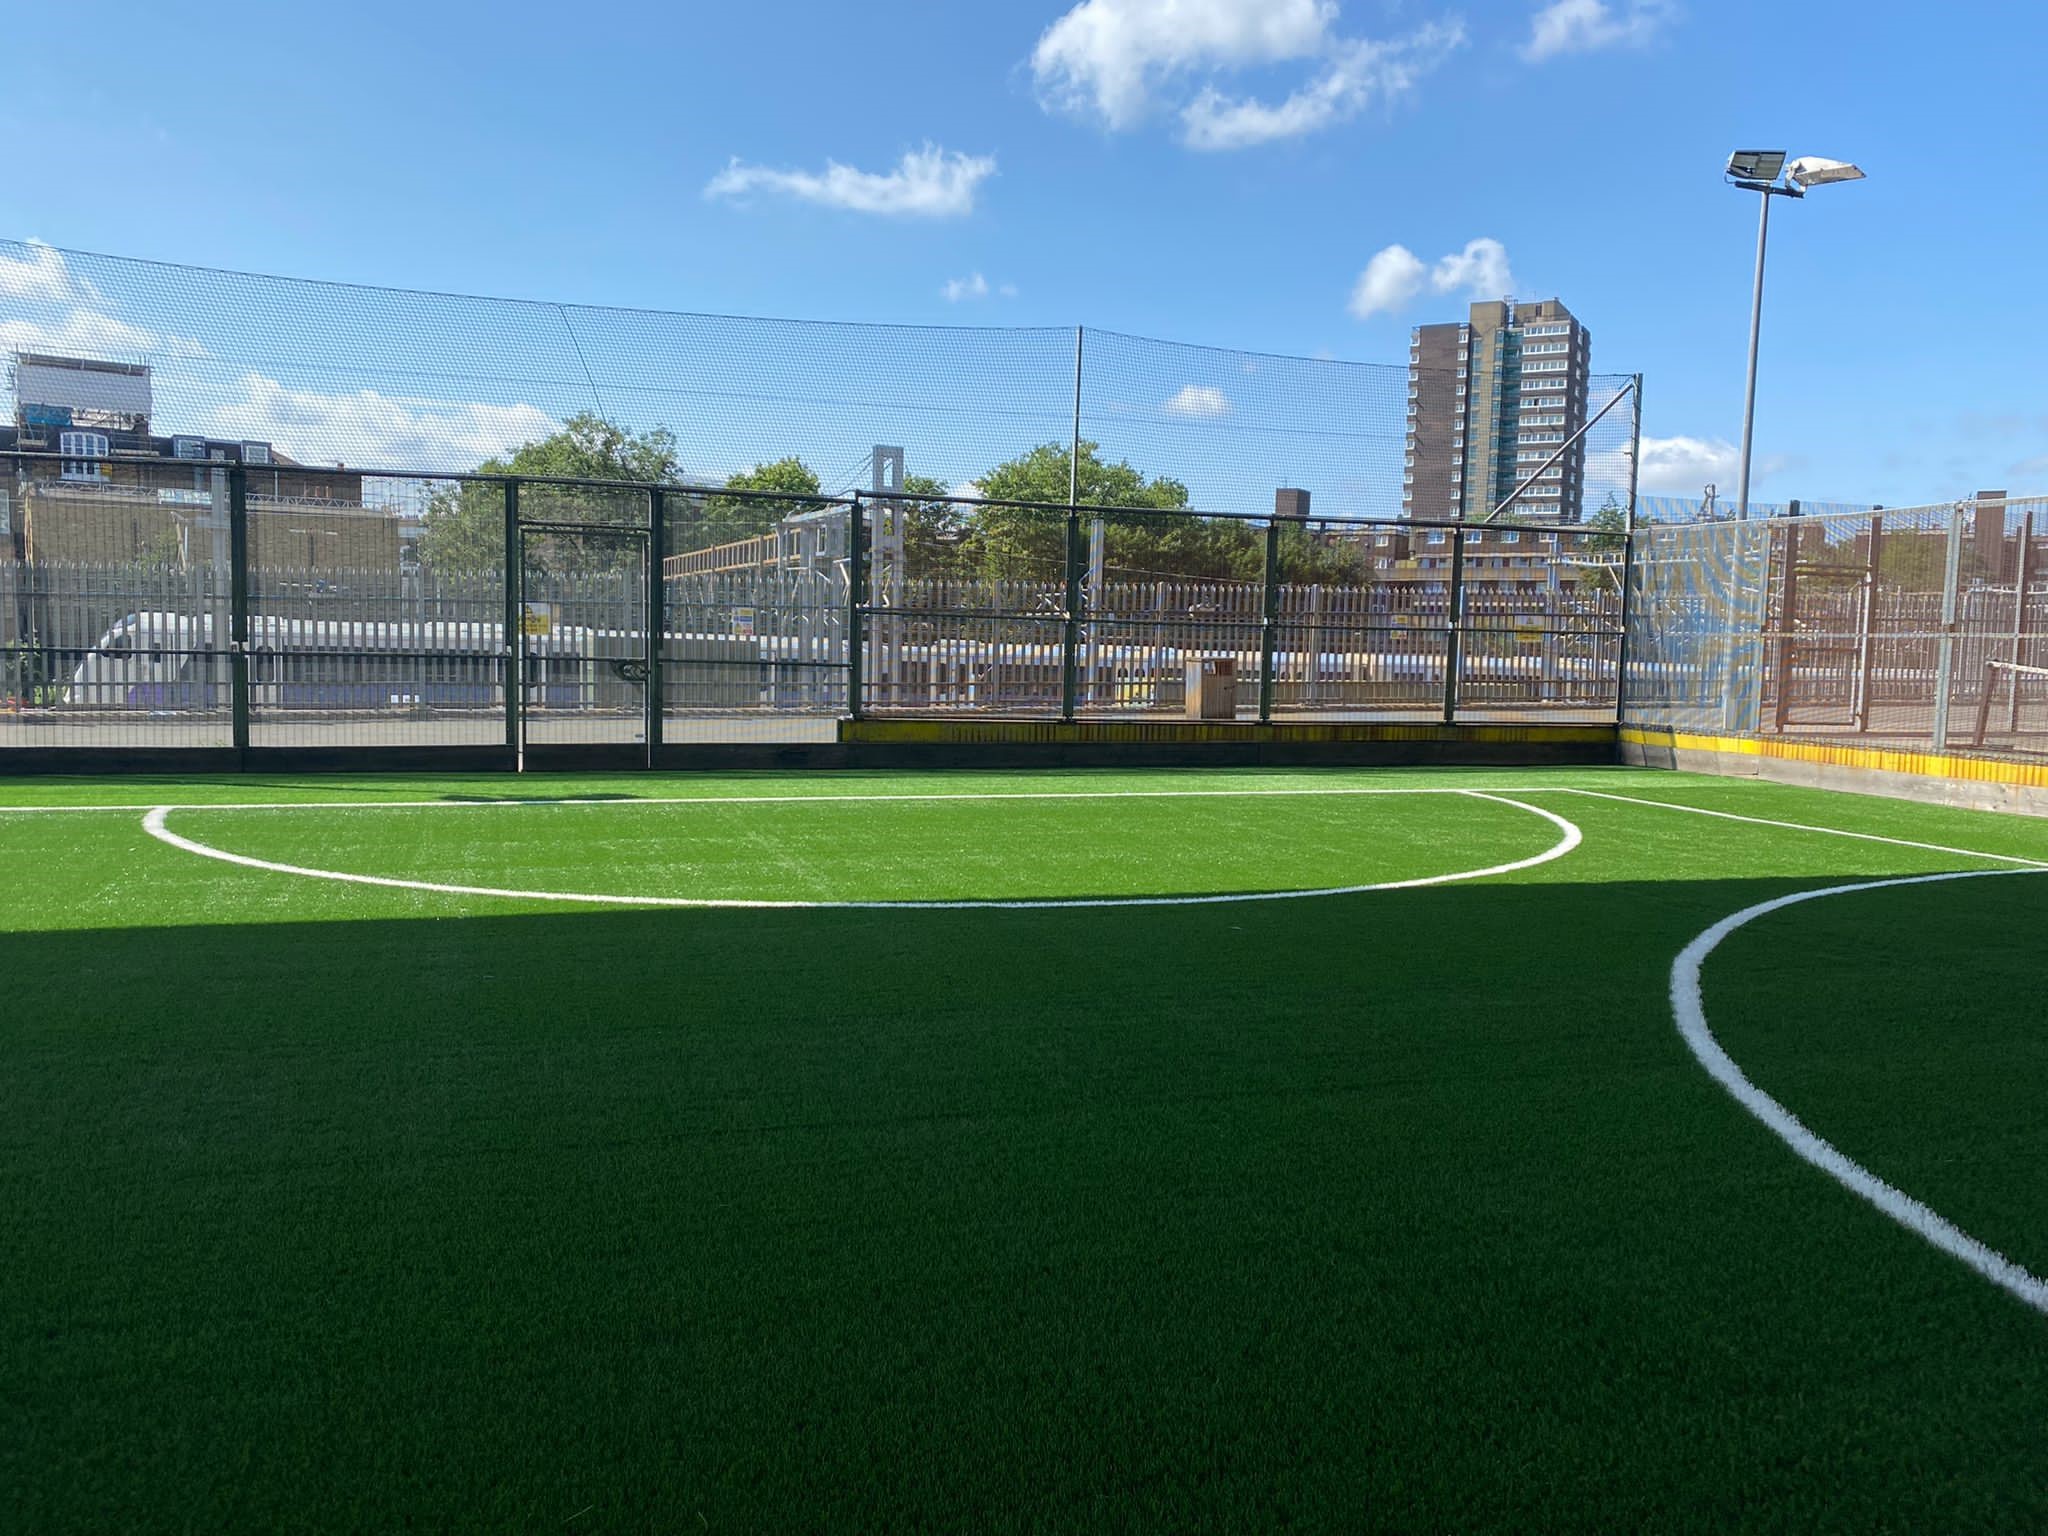 Another prime example of ETC Sports Surfaces football pitch design and resurfacing services in West London.